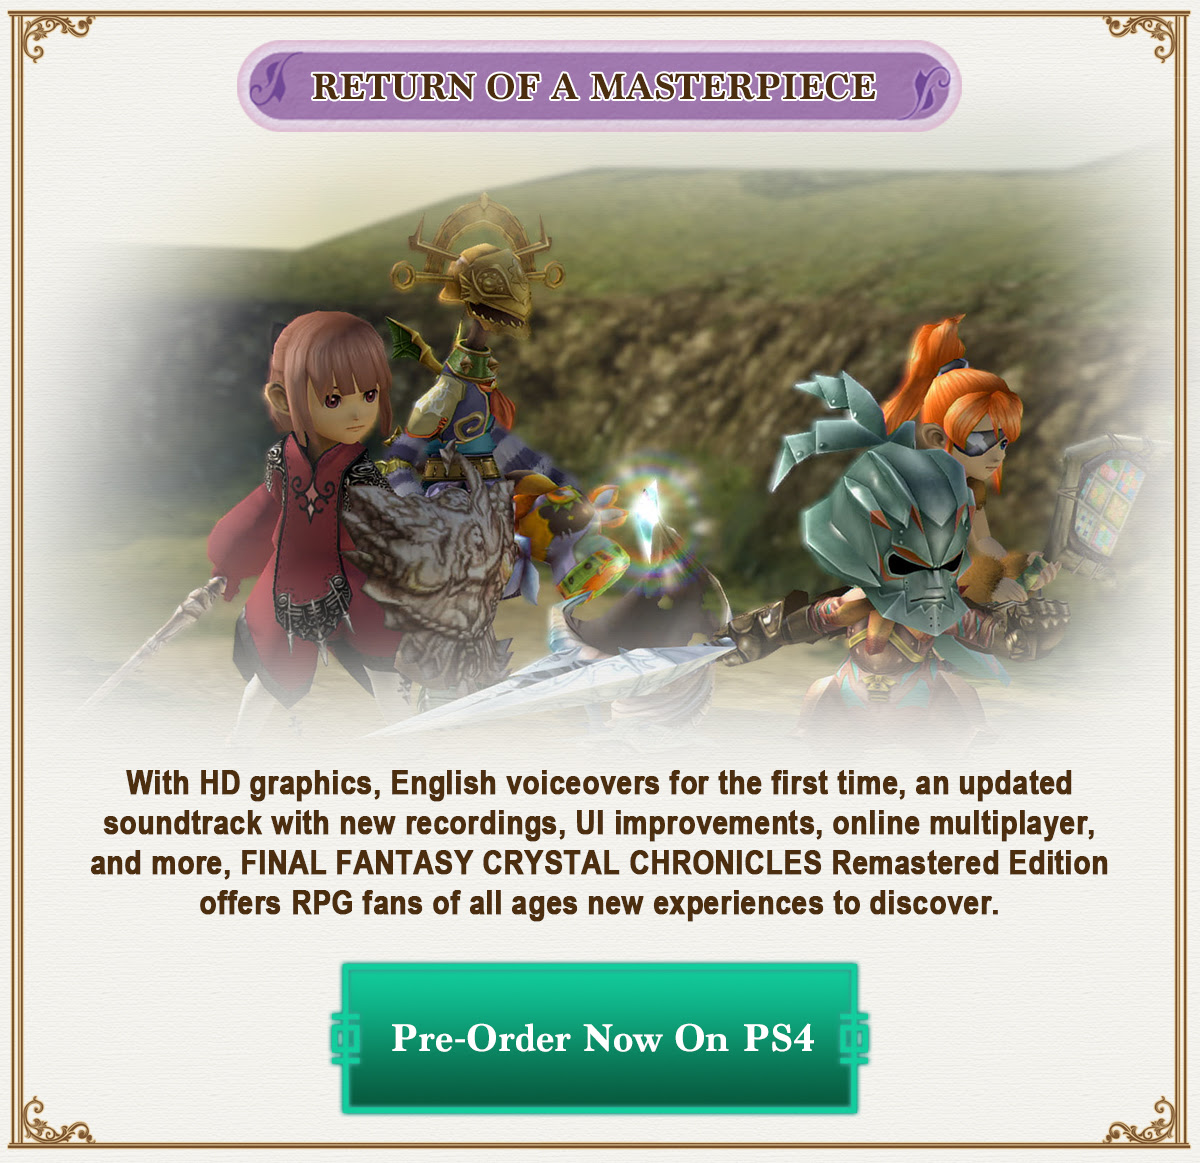 With HD graphics, English voiceovers for the first time, an updated soundtrack with new recordings, UI improvements, online multiplayer, and more, FINAL FANTASY CRYSTAL CHRONICLES Remastered Edition offers RPG fans of all ages new experiences to discover.